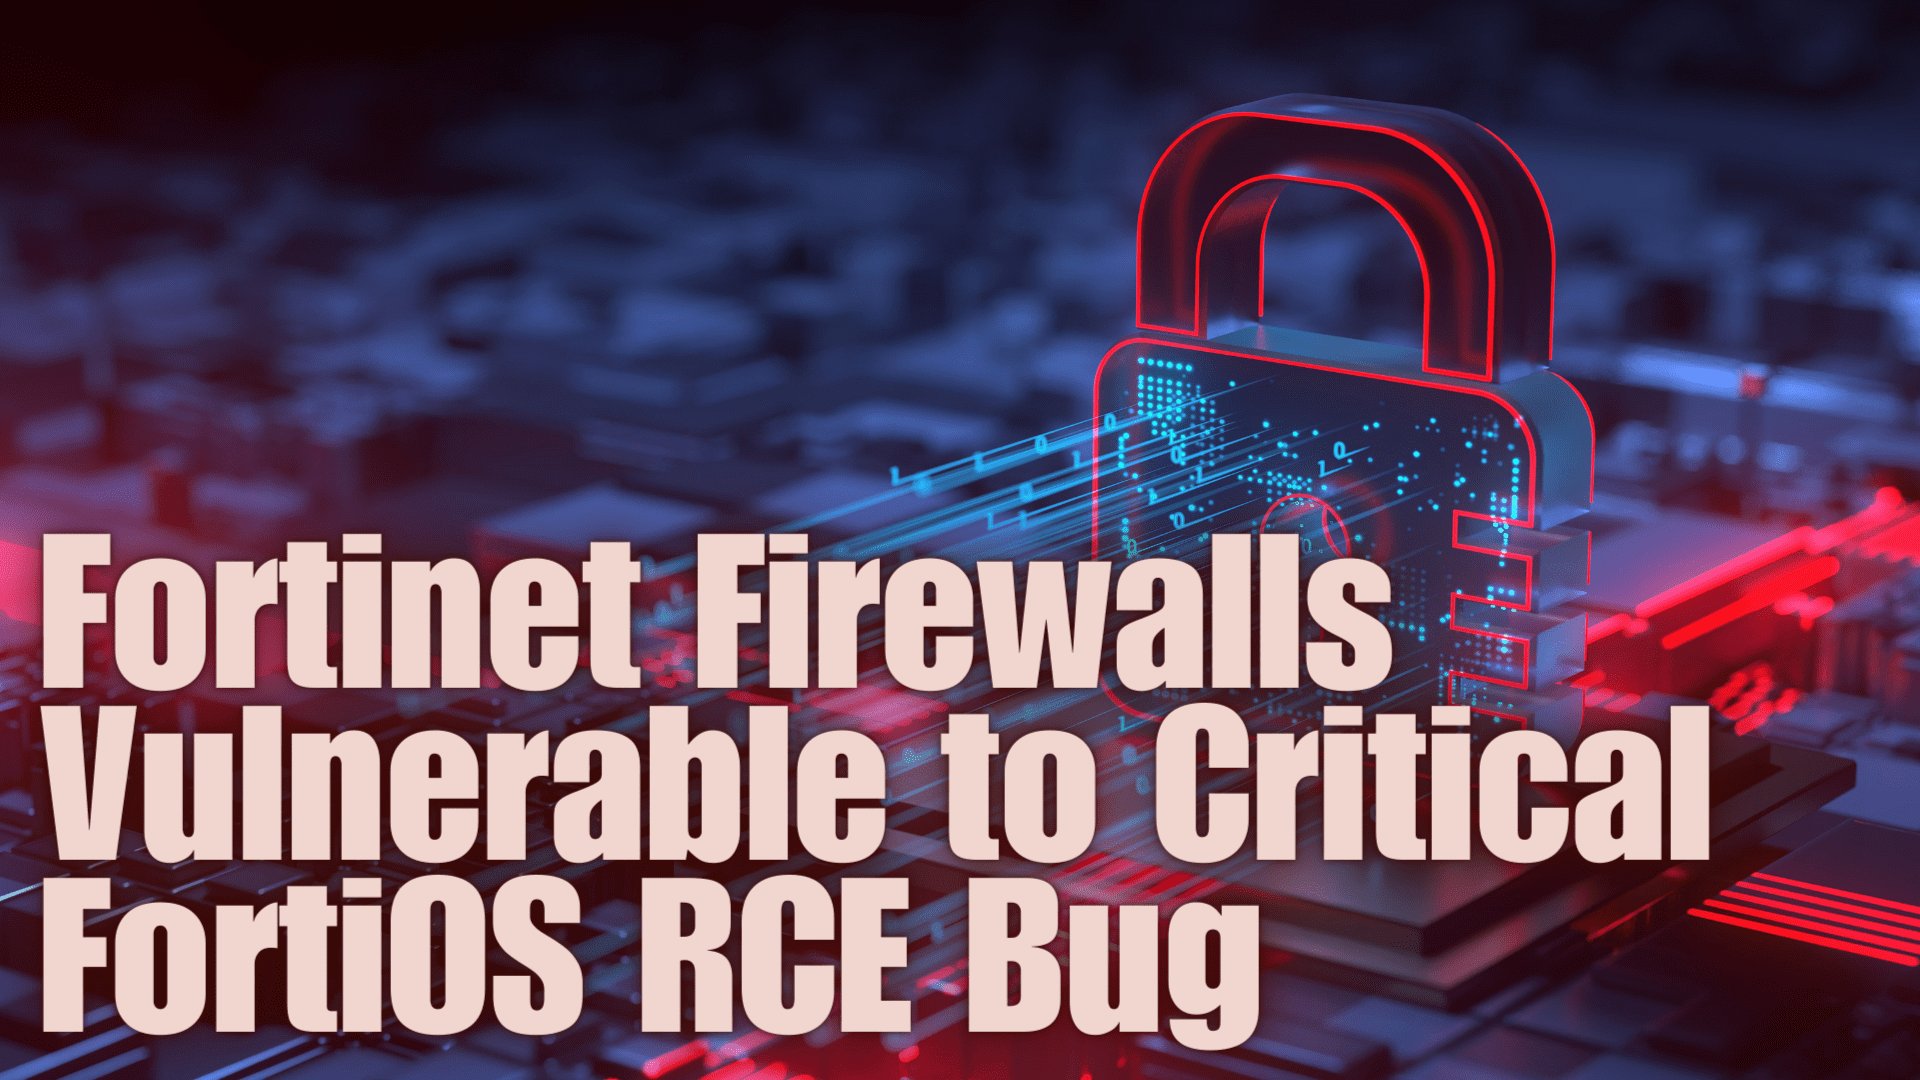 Fortinet Firewalls Vulnerable to Critical FortiOS RCE Bug